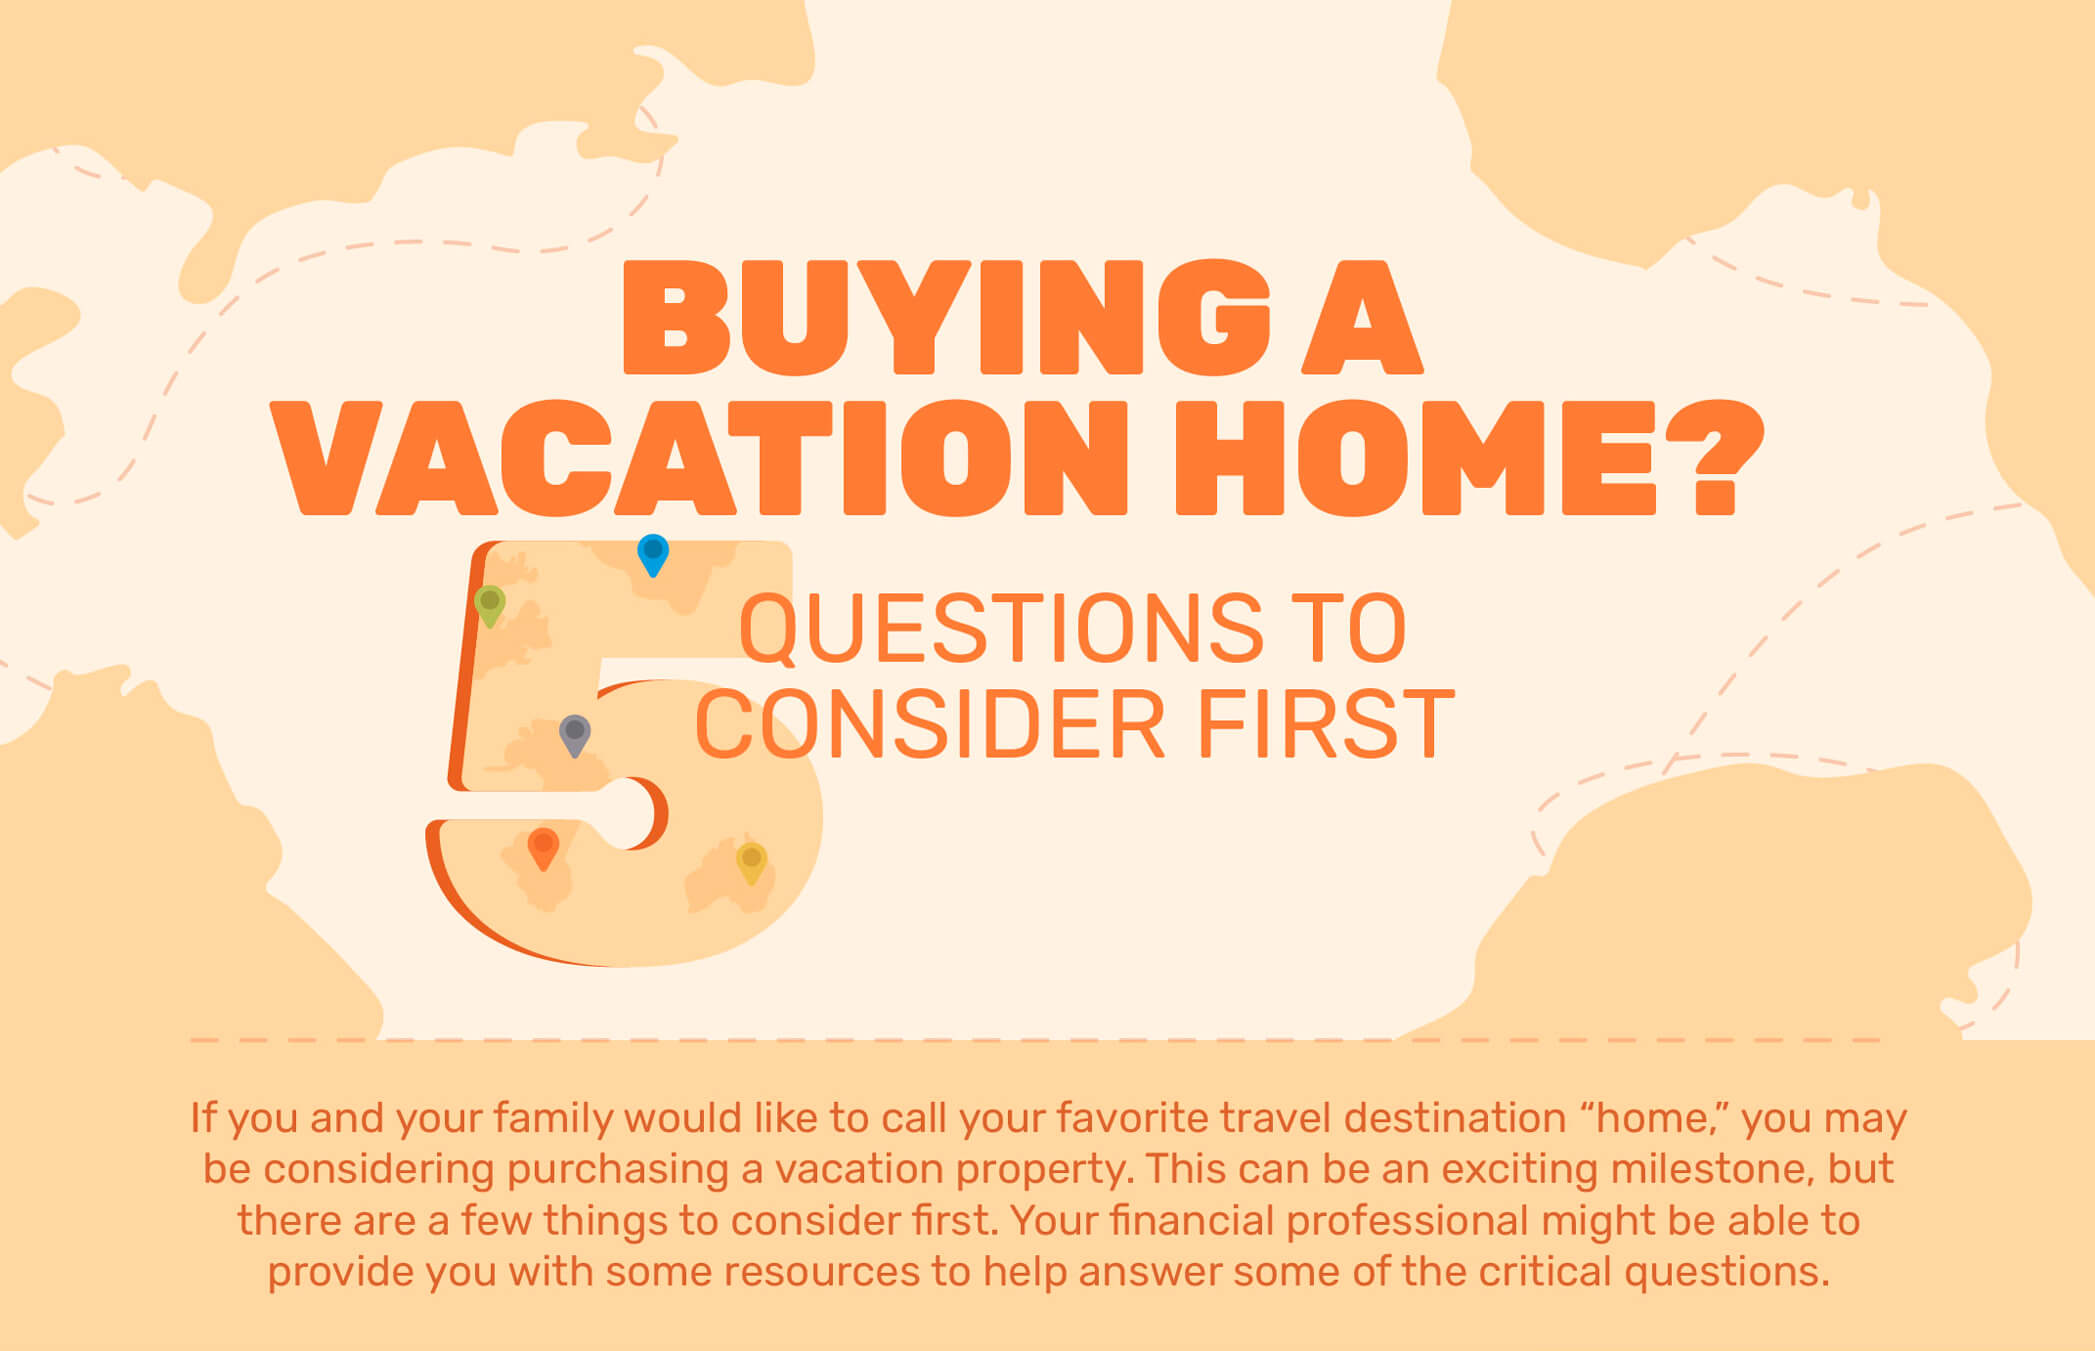 Buying a Vacation Home? 5 Questions to Consider First. If you and your family would like to call your favorite travel destination “home,” you may be considering purchasing a vacation property. This can be an exciting milestone, but there are a few things to consider first. Your financial professional might be able to provide you with some resources to help answer some of the critical questions.